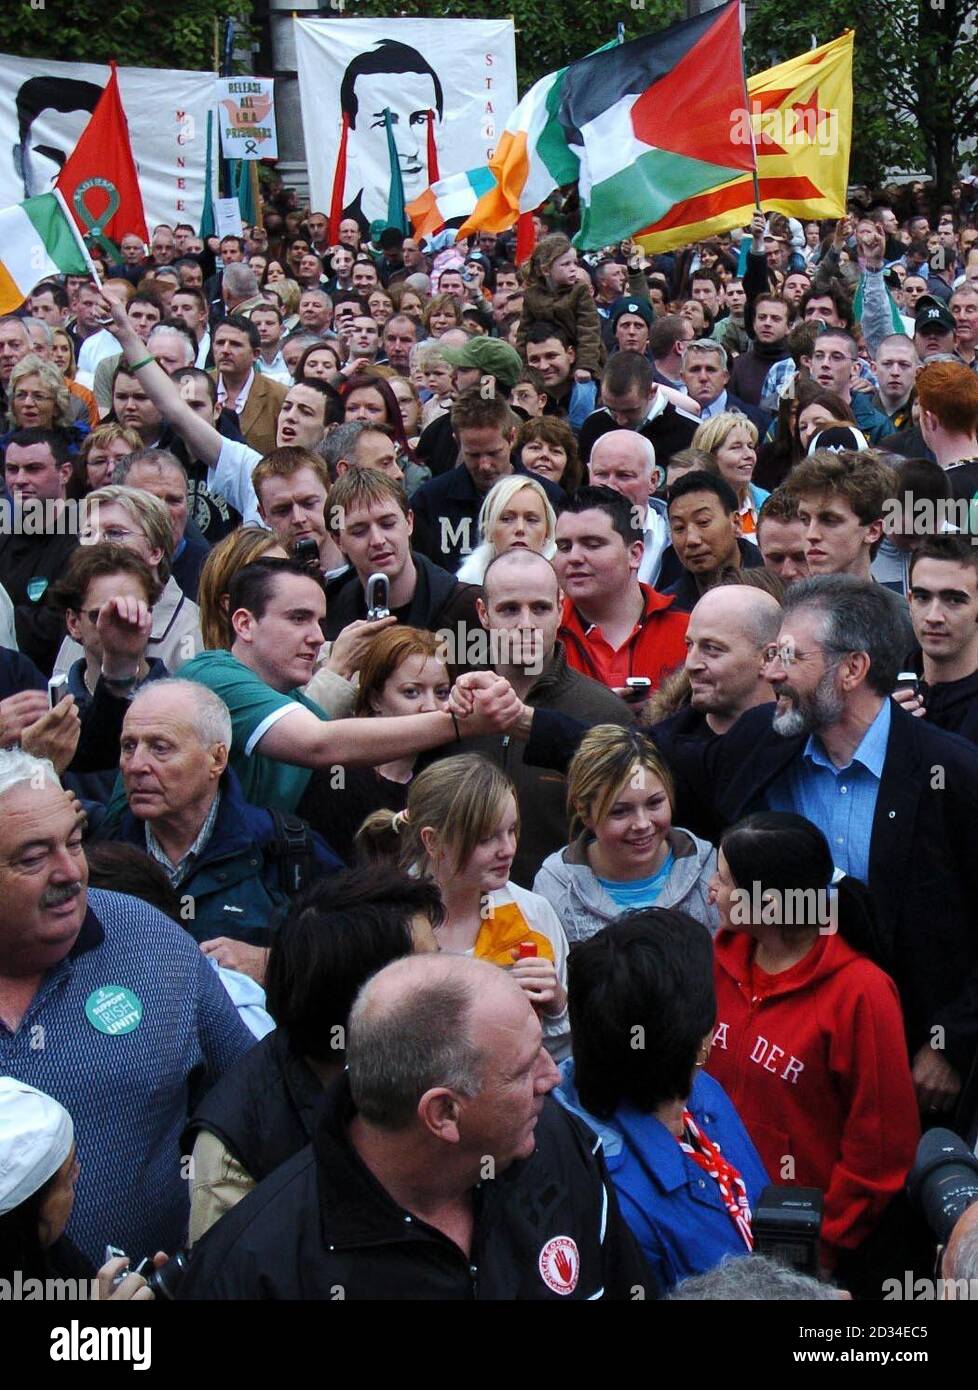 Sinn Fein President Gerry Adams (bottom right) among the thousands of supporters at a rally to mark the party's 100th anniversary Dublin, Saturday September 24, 2005. He said the IRA was going to honour its commitment to dump its arms in the 'near future'. See PA story ULSTER Politics. PRESS ASSOCIATION Photo. Photo credit should read: John Giles/PA Stock Photo